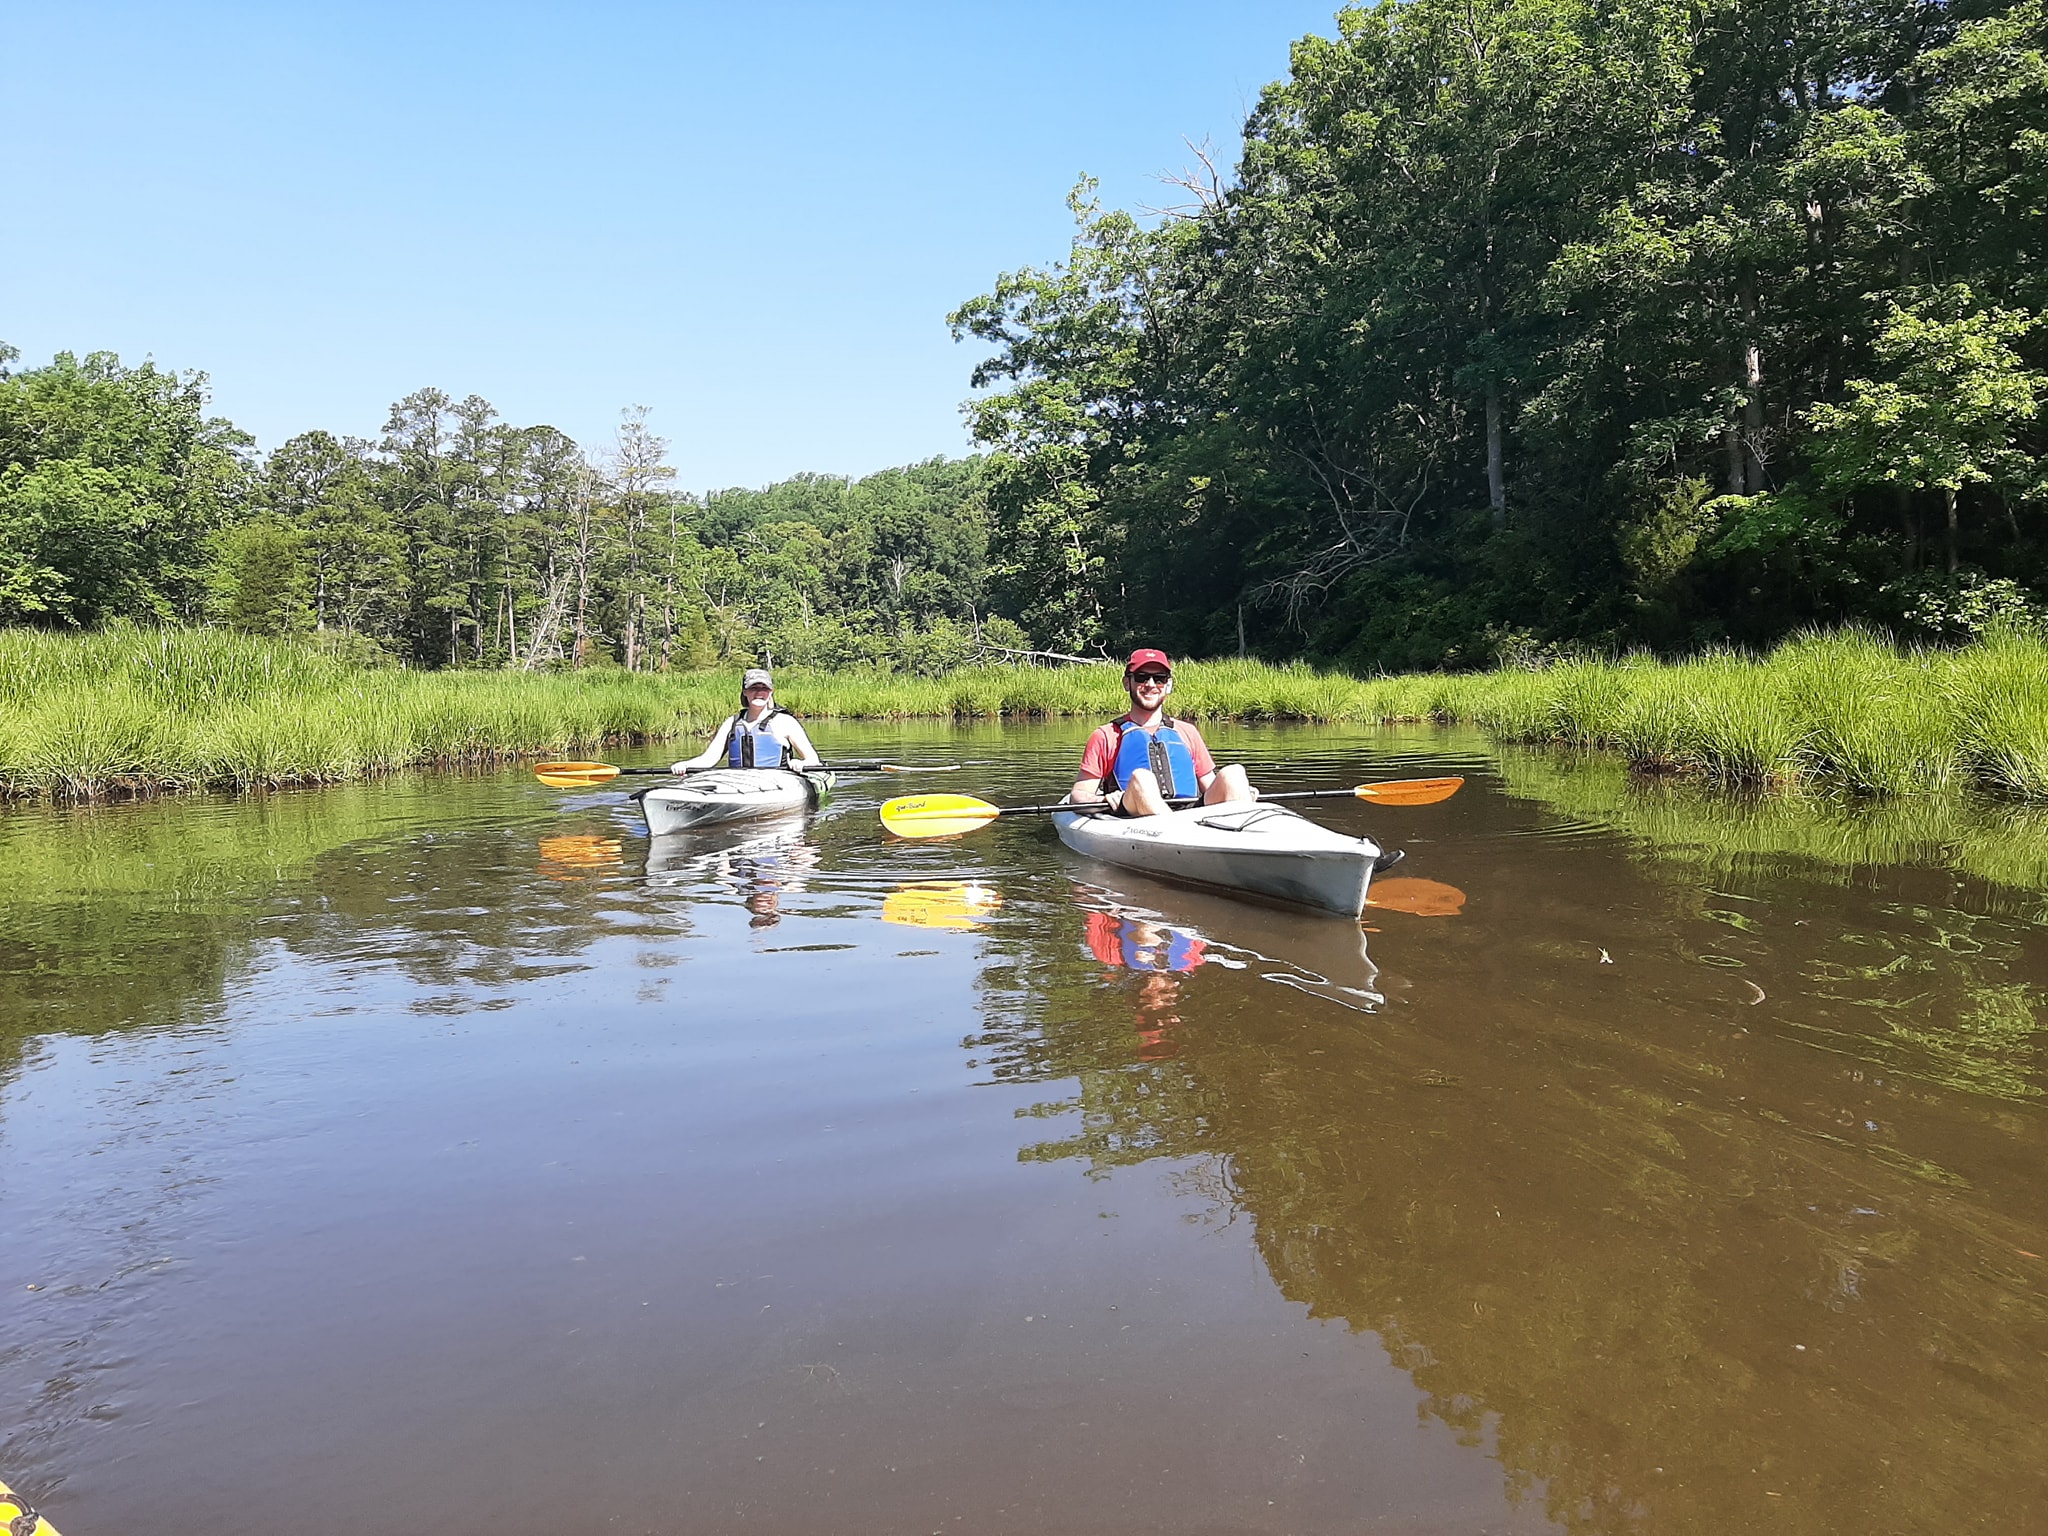 Owner of Bay Country Kayaking Shares Her Love of Paddling in the